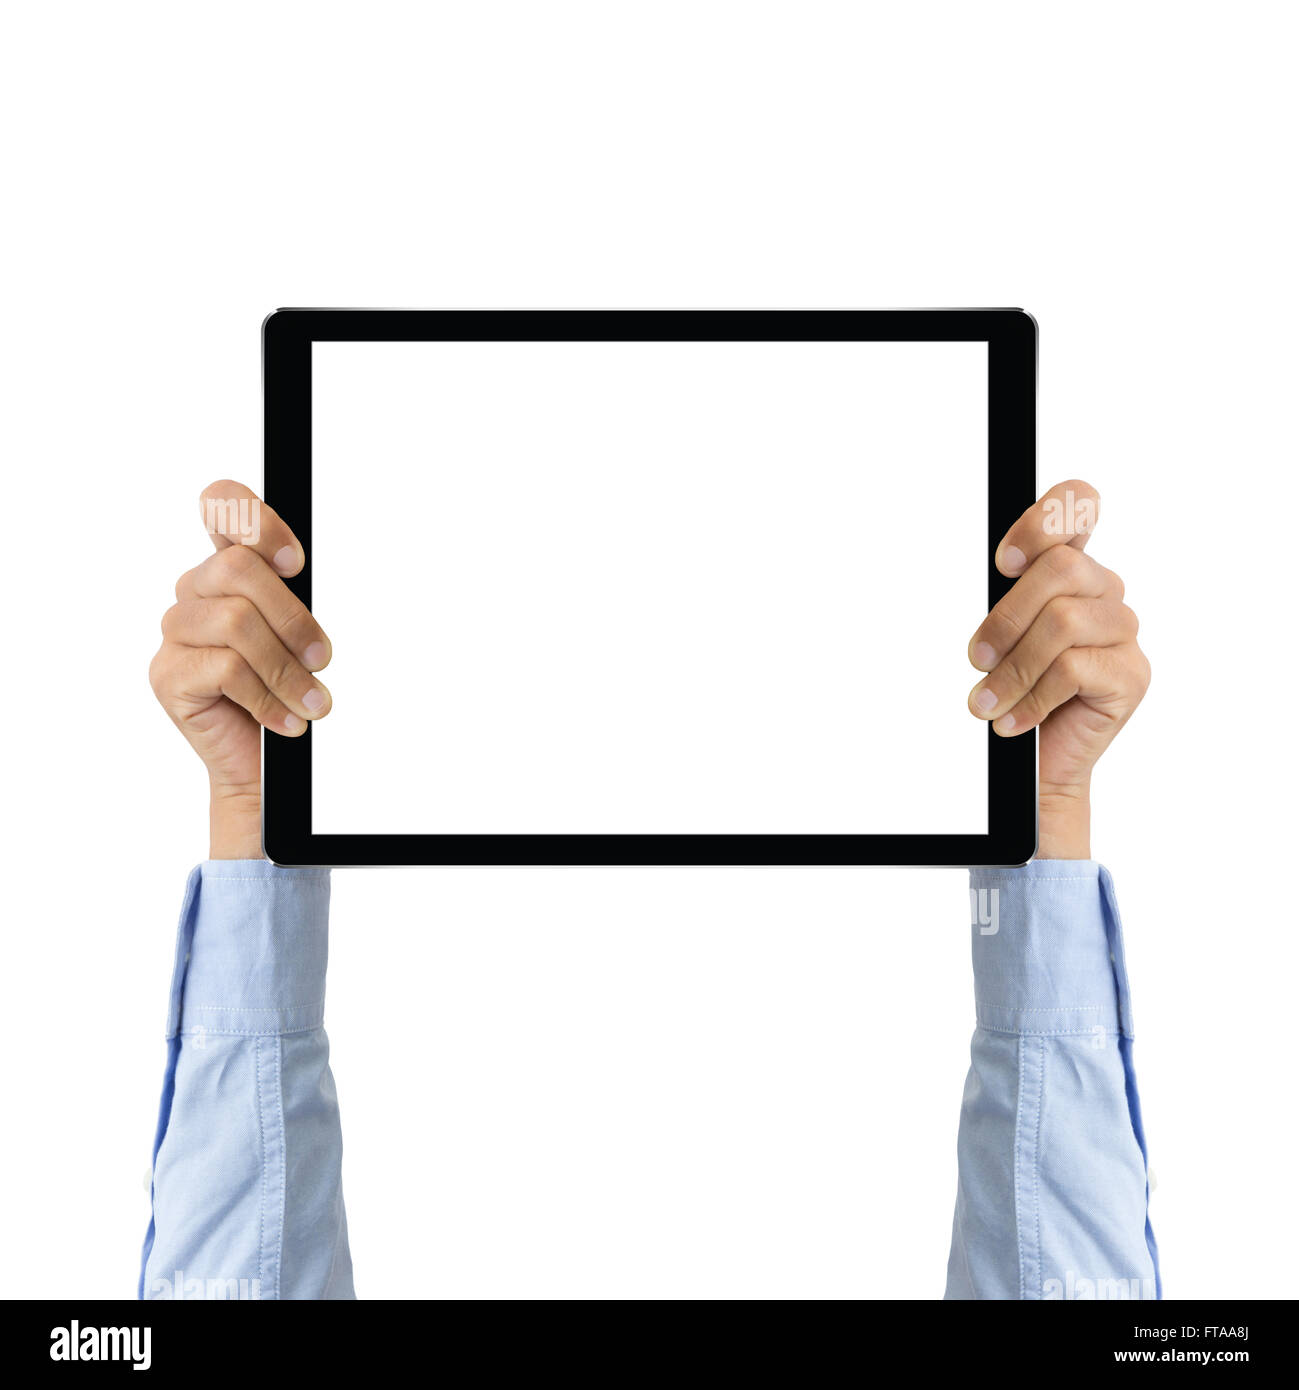 business hand holding tablet showing screen display Stock Photo